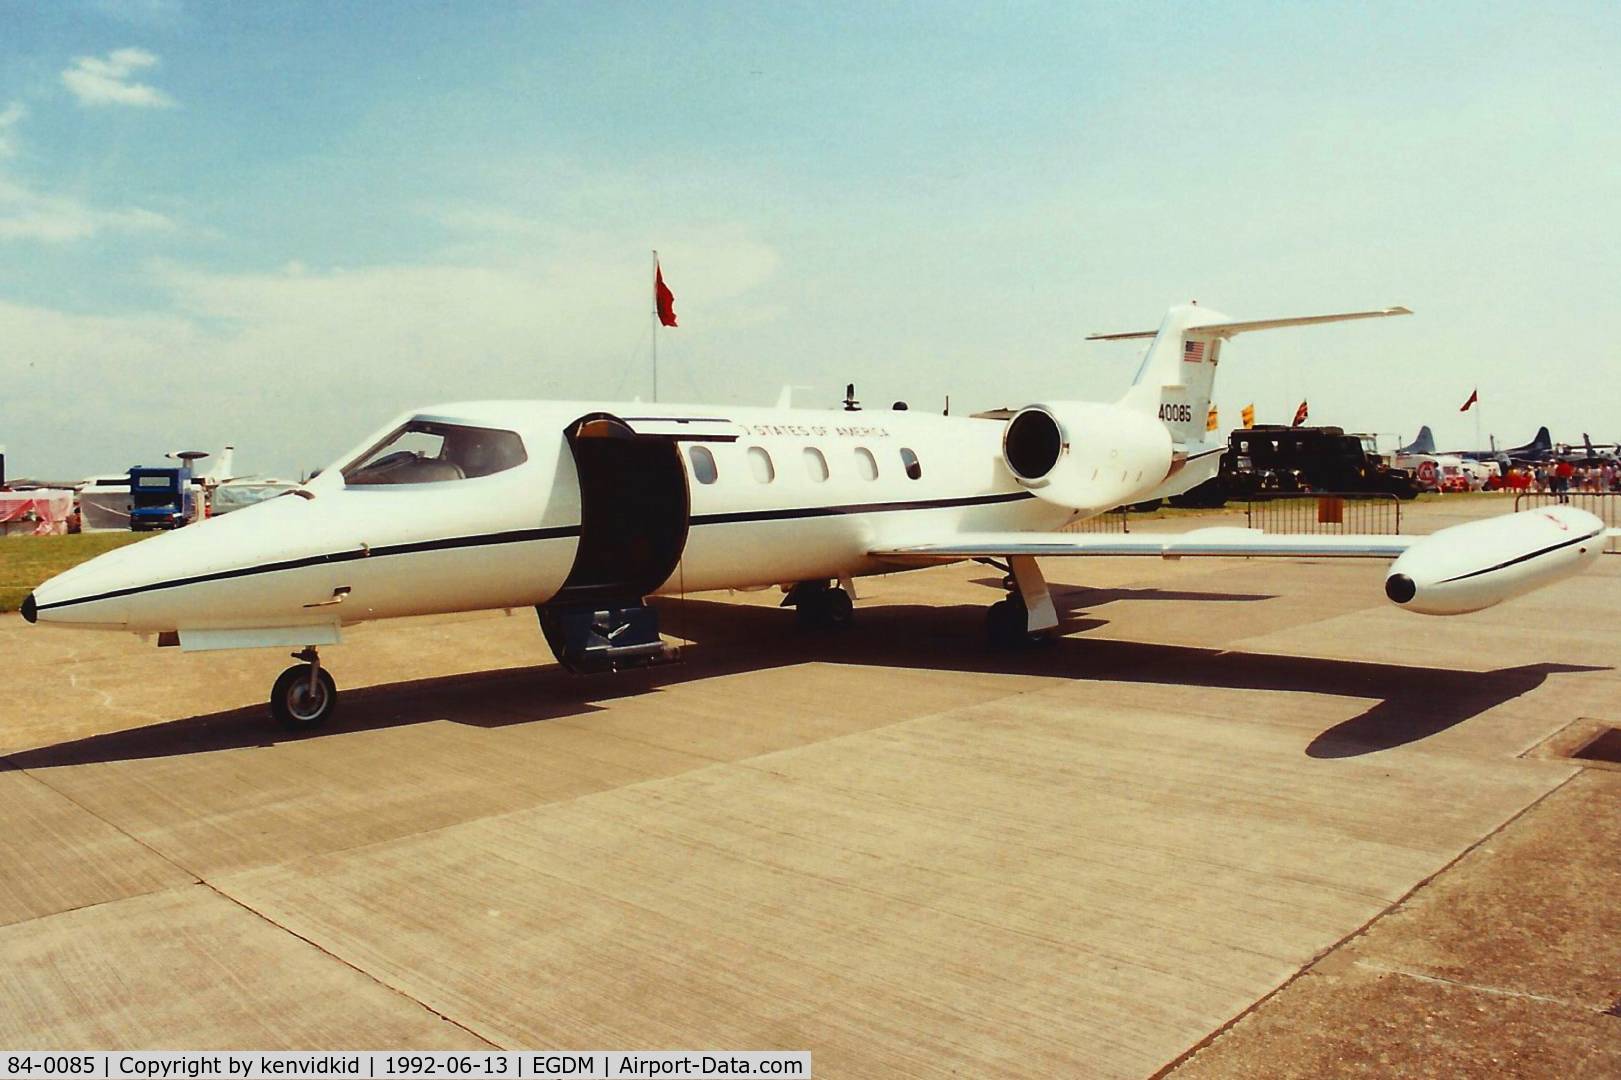 84-0085, 1984 Gates Learjet C-21A C/N 35A-531, At Boscombe Down, scanned from print.